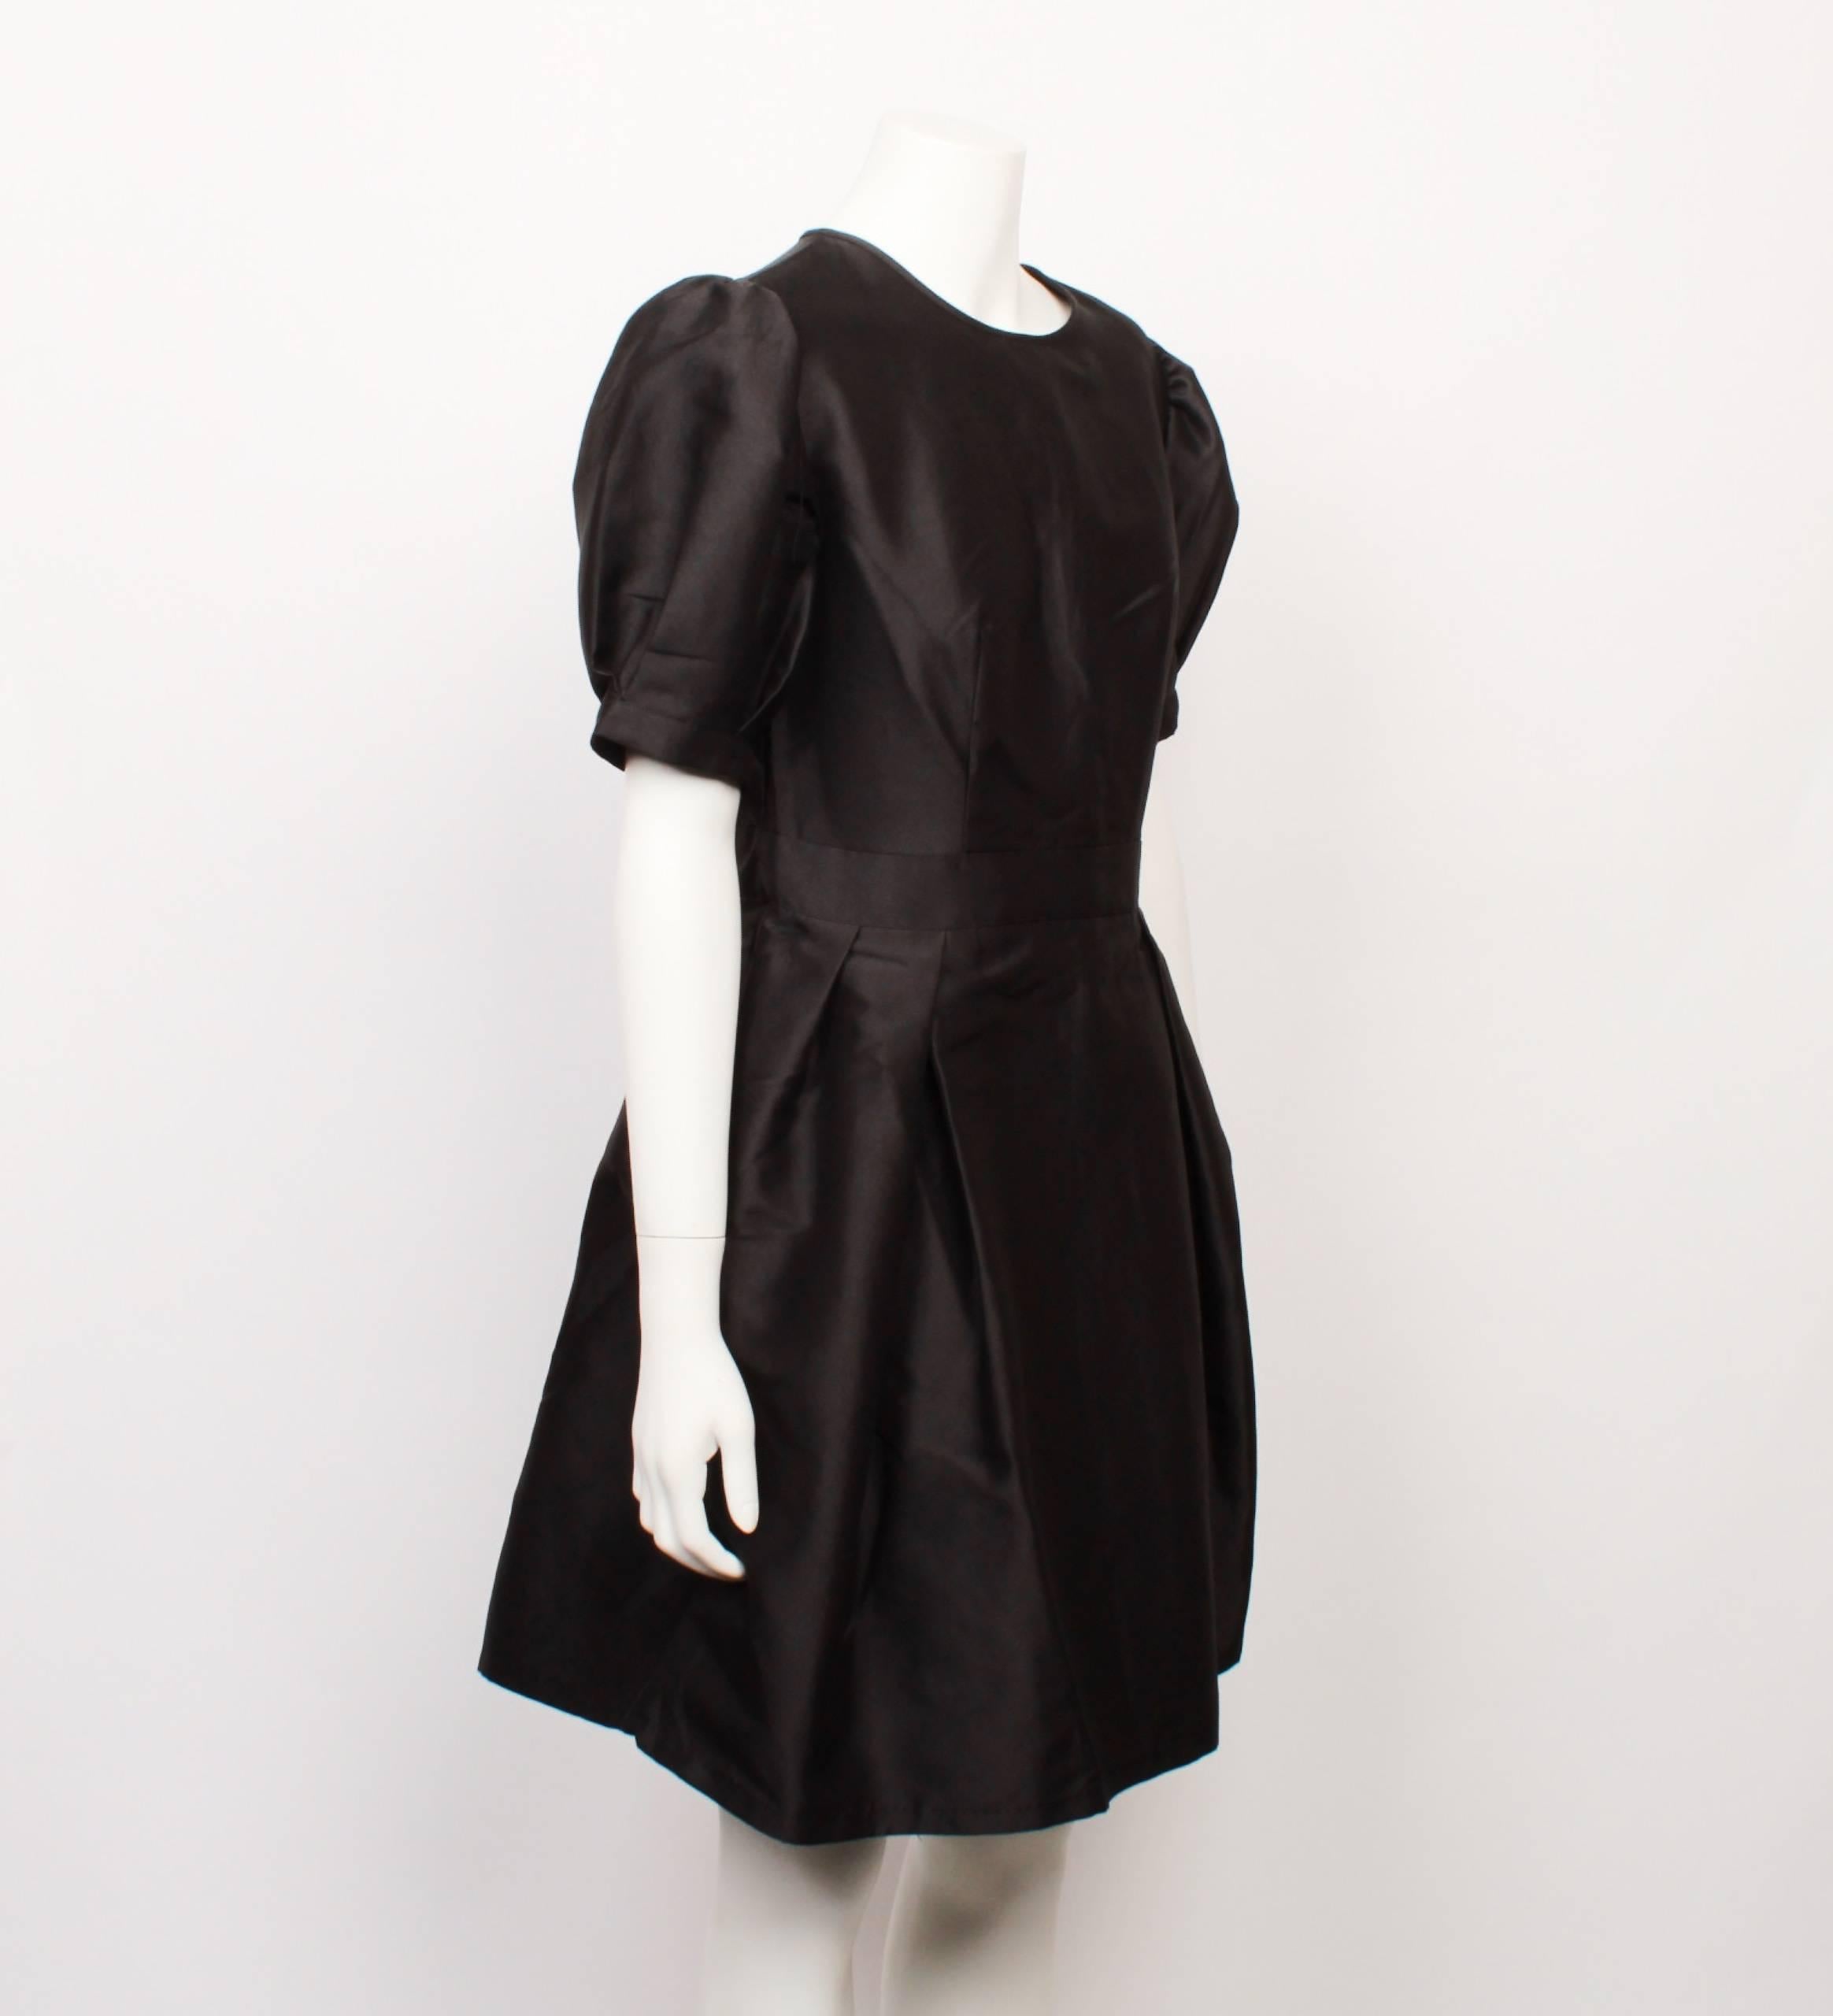 Cute and classic Christian Dior black silk satin party dress features a fitted shell bodice with high round neckline and gathered puffed sleeves. Skirt is knee length and has knife pleats at the waist to create a lovely quintessential Dior full